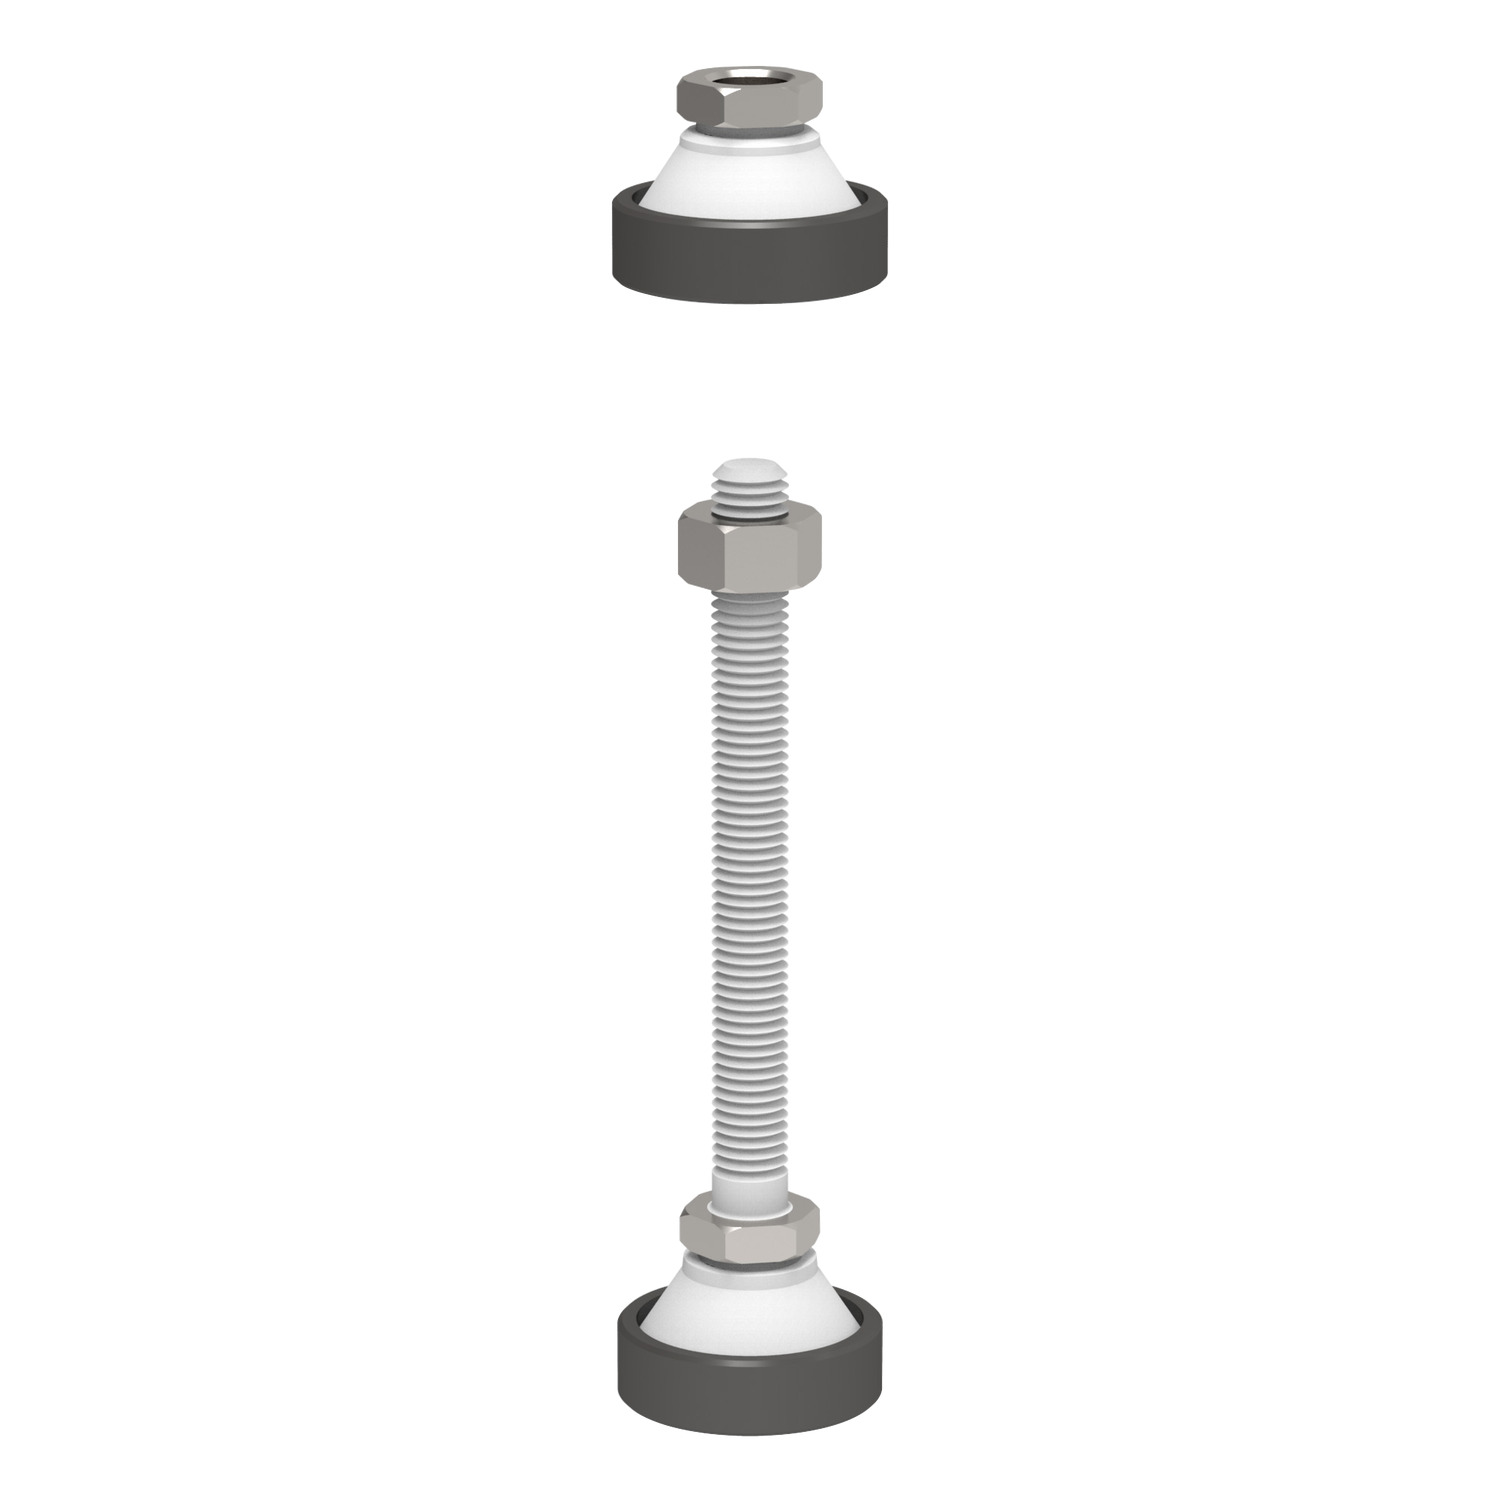 Product 34761, Levelling Feet - Non Slip pad thermoplastic, bolt stainless steel / 